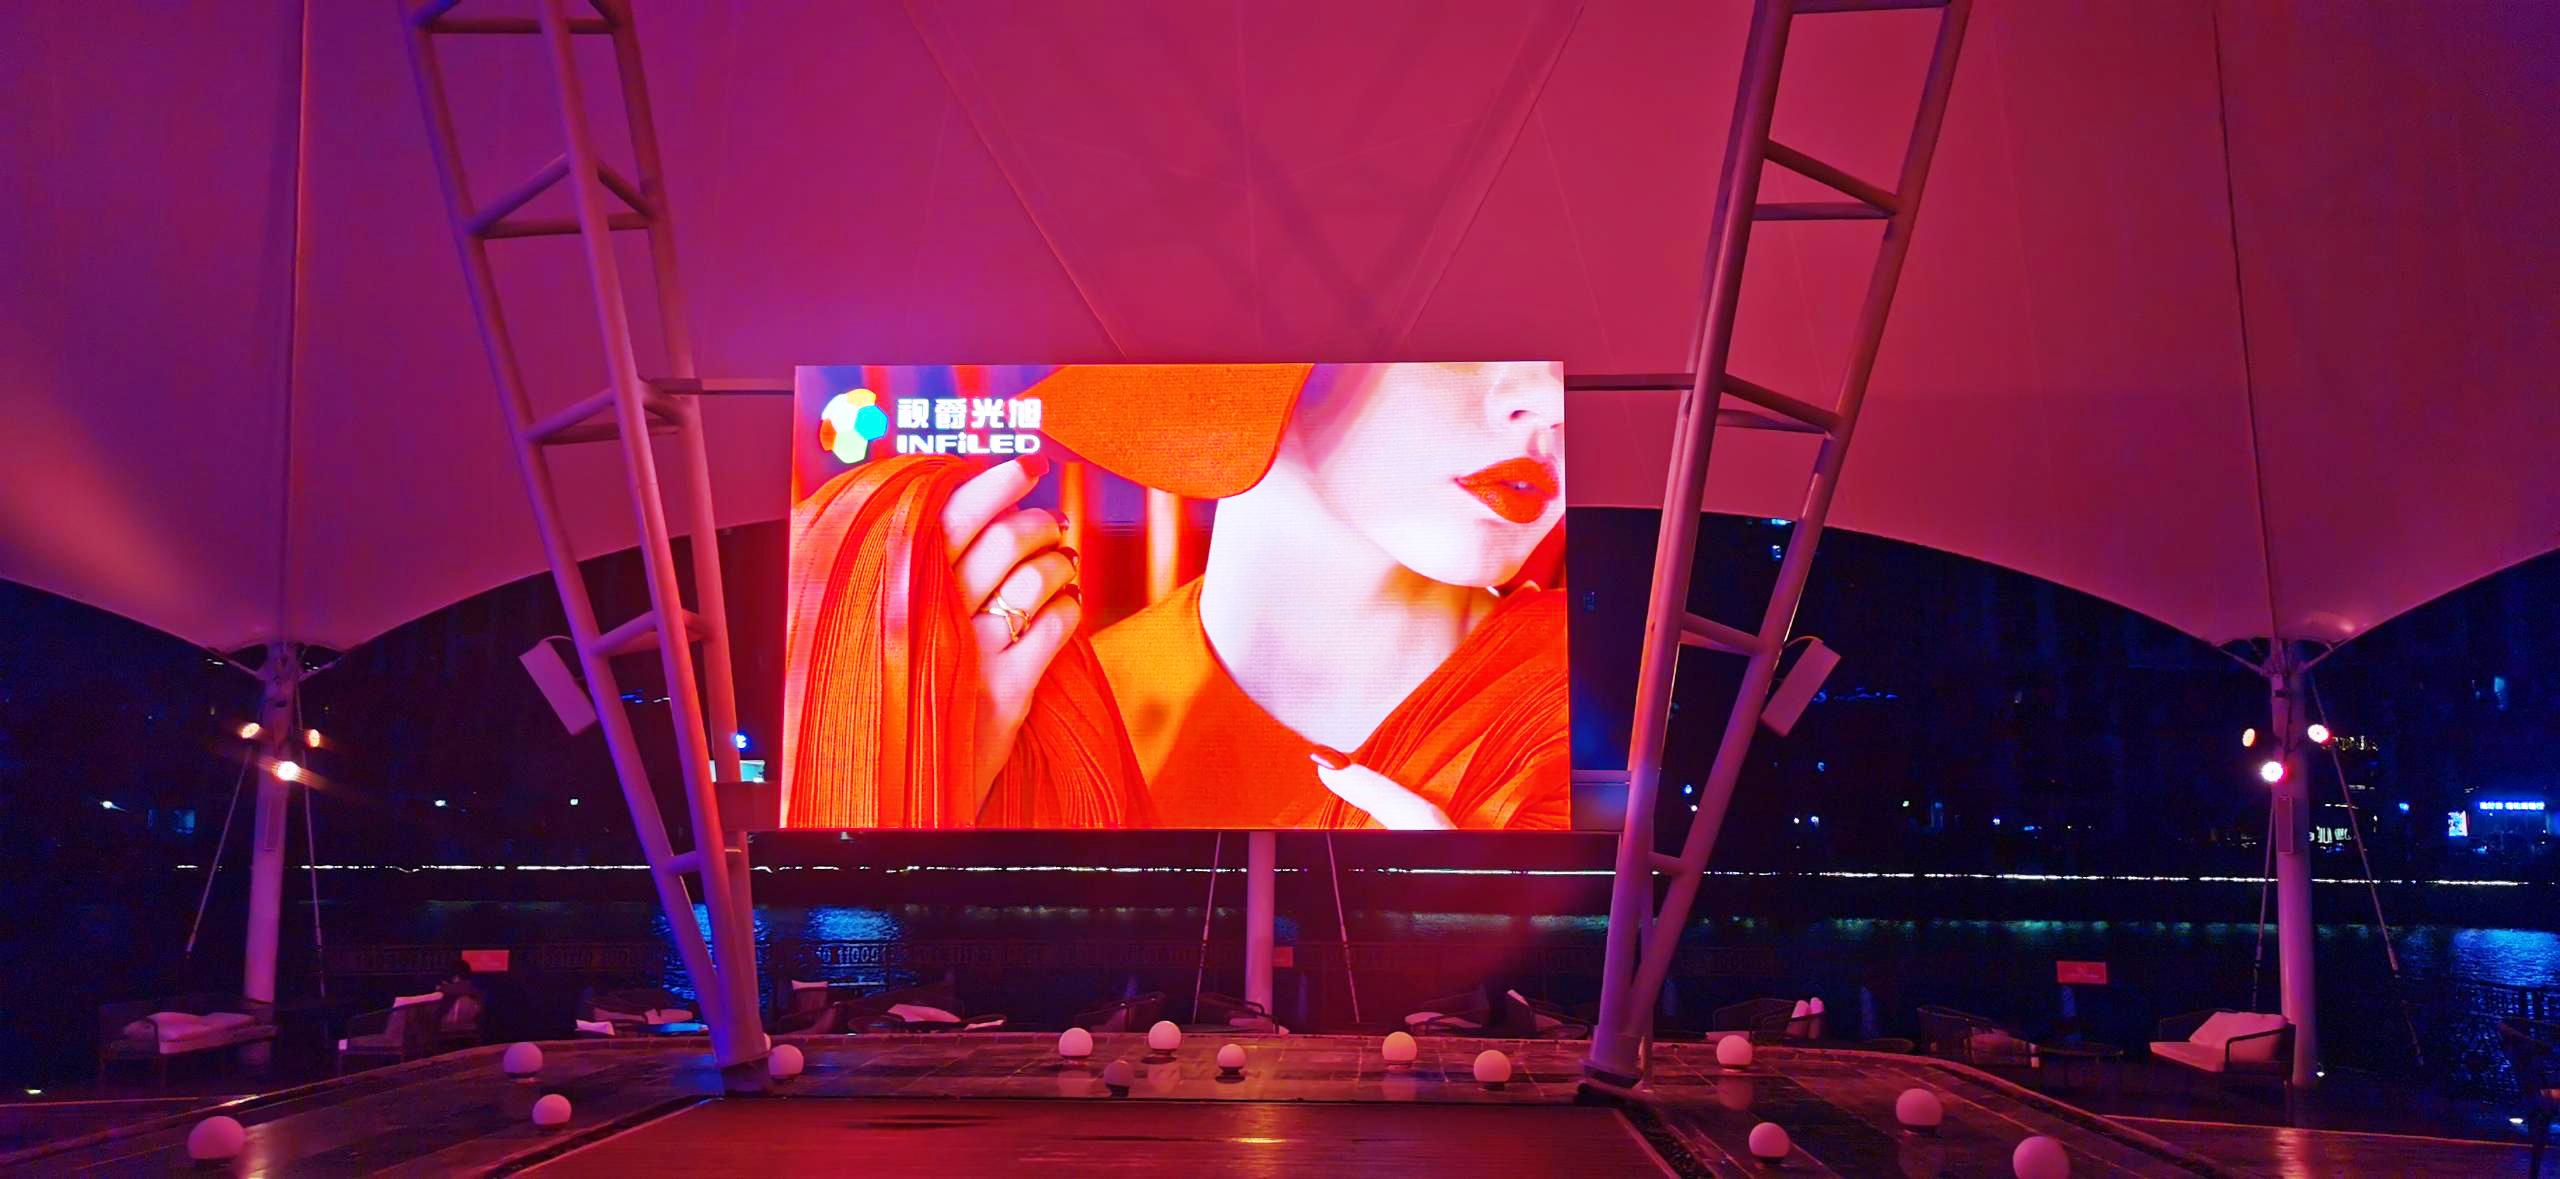 INFiLED LED Displays Upgrade Visual Experience for Ramada Hotel in Huizhou 